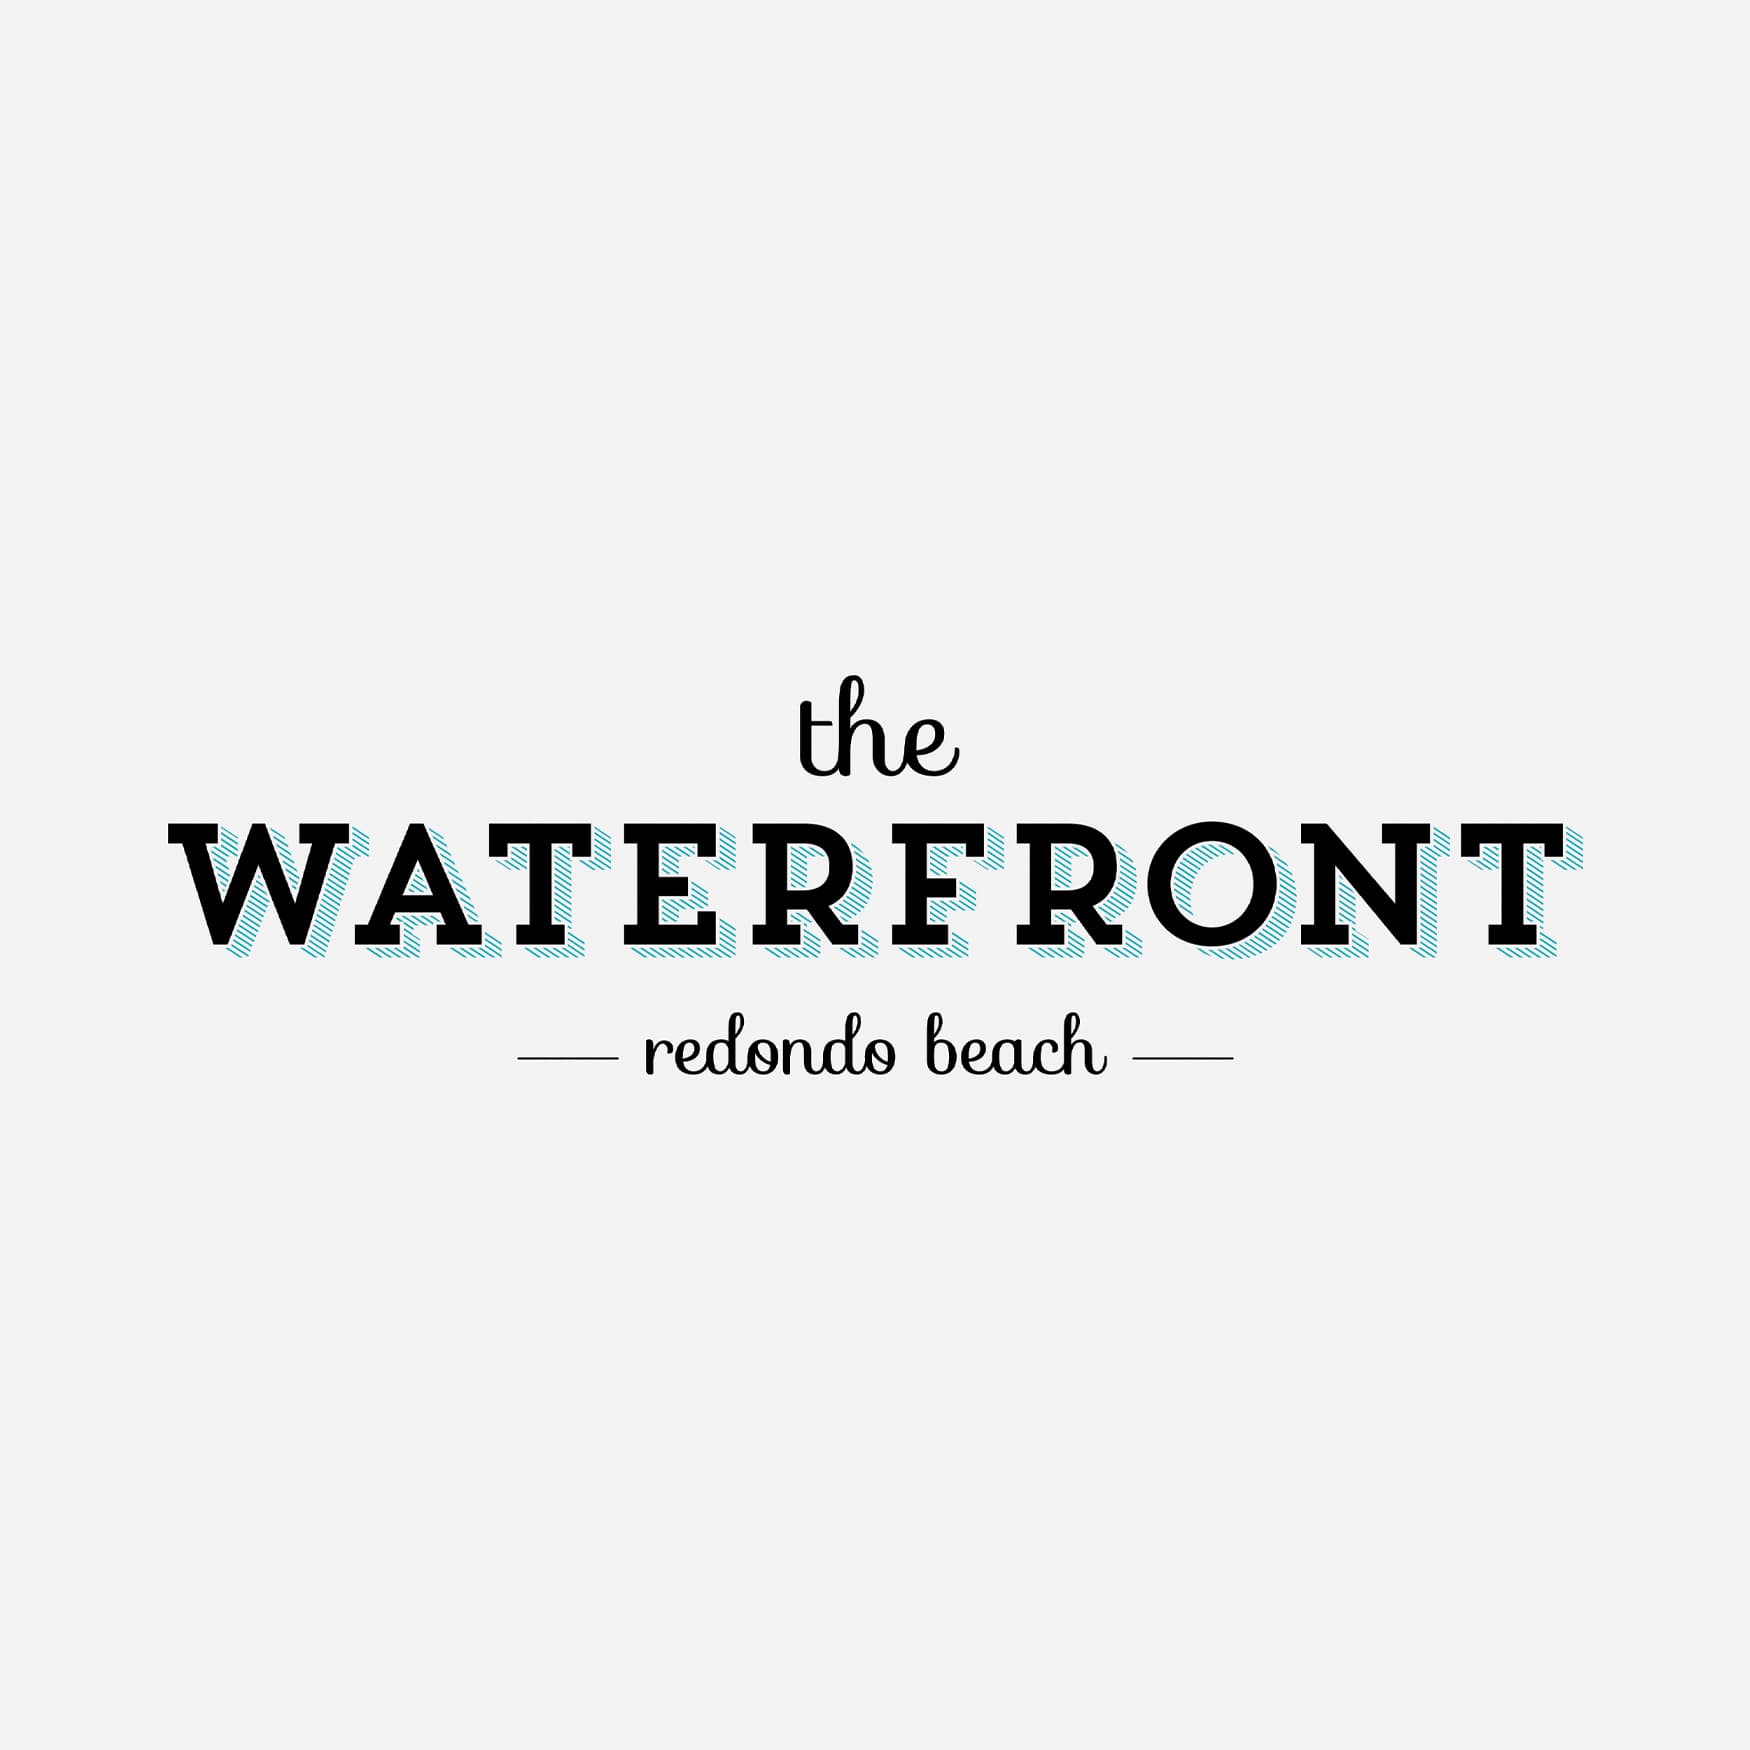 RSM Design worked with CenterCal Properties to develop a brand strategy and voice for The Waterfront, a mixed-use project in Redondo Beach, California. Branding and Logo Design.